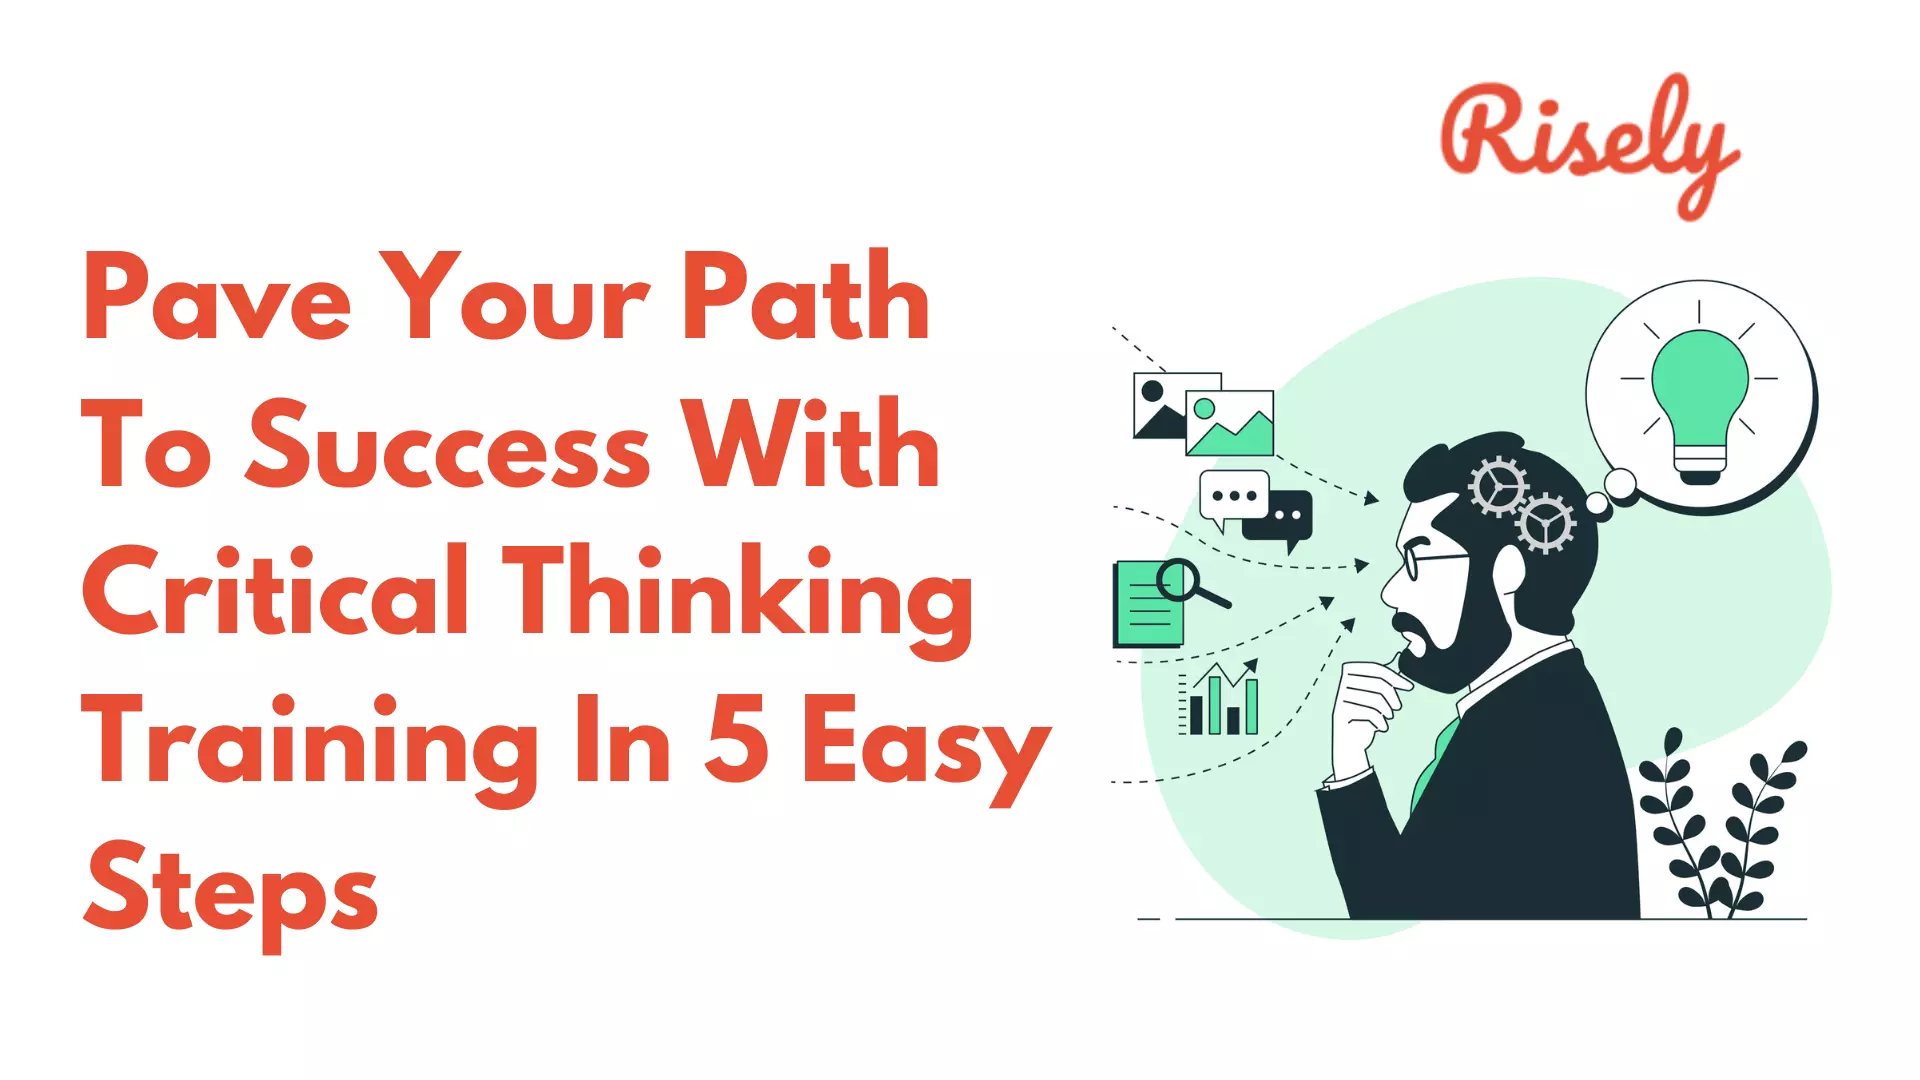 Pave Your Path To Success With Critical Thinking Training In 5 Easy Steps